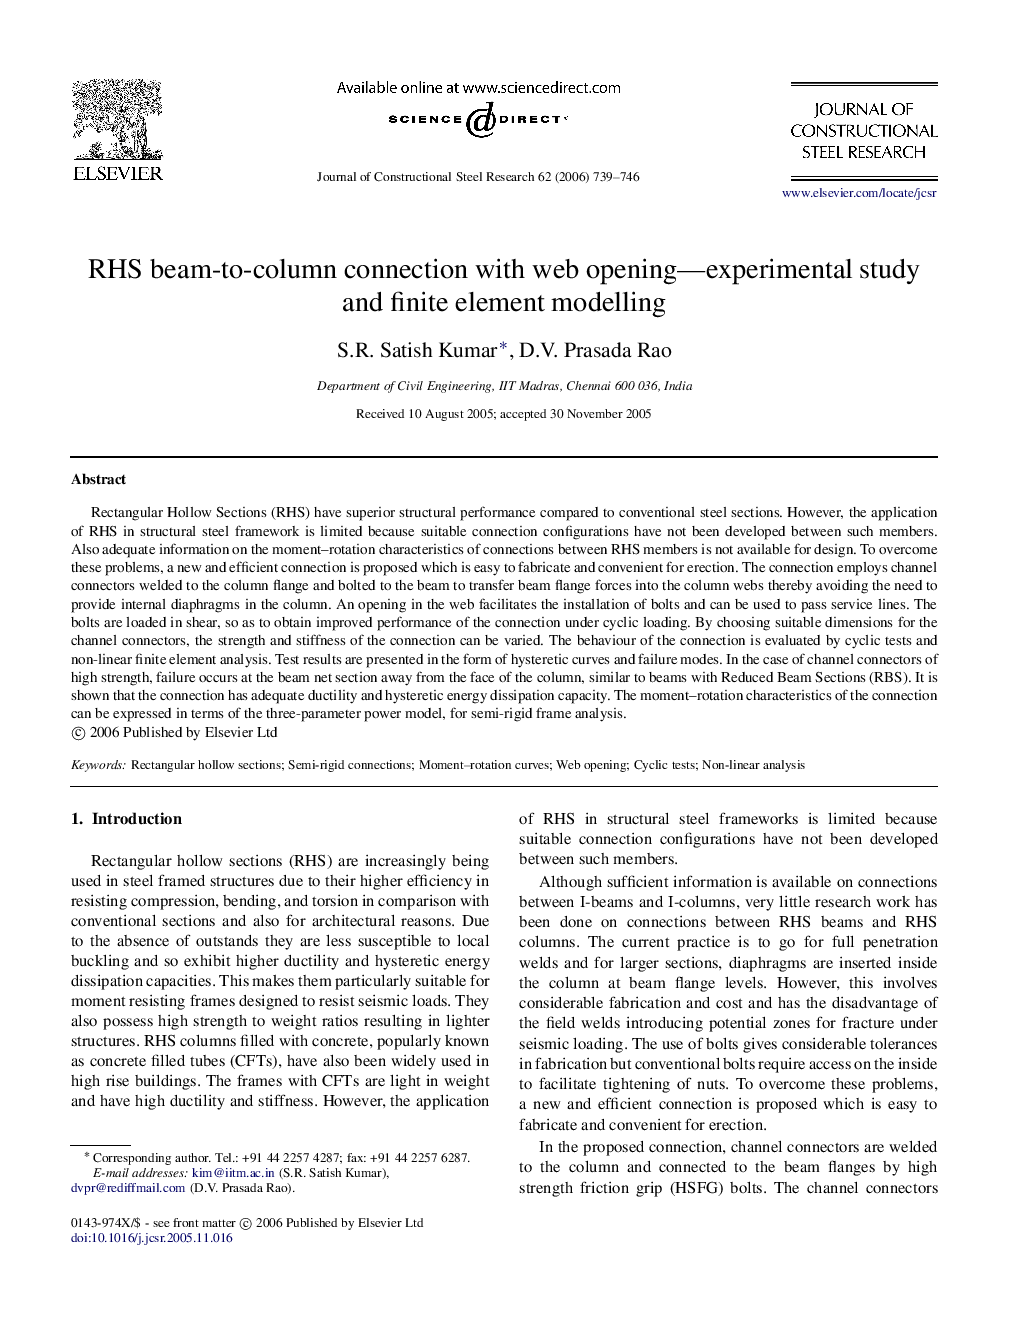 RHS beam-to-column connection with web opening—experimental study and finite element modelling